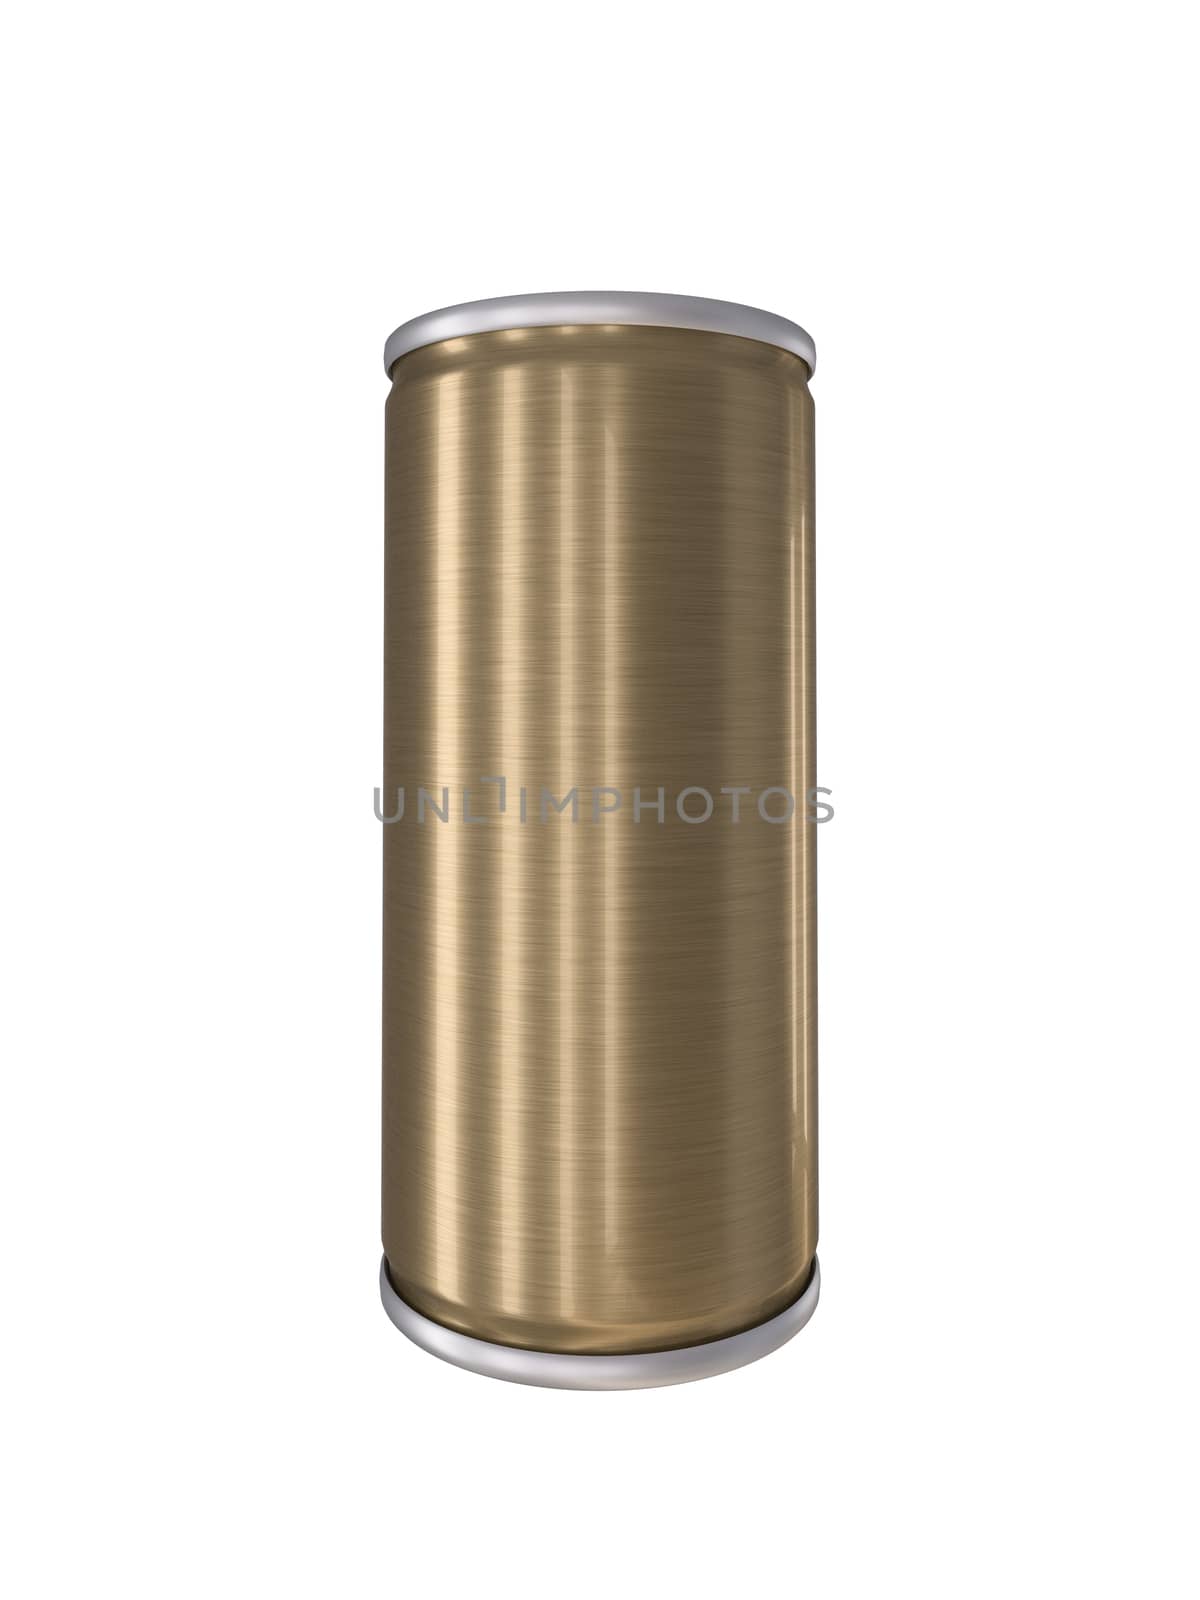 Copper Aluminum Drink Can isolated with clipping path by chingraph